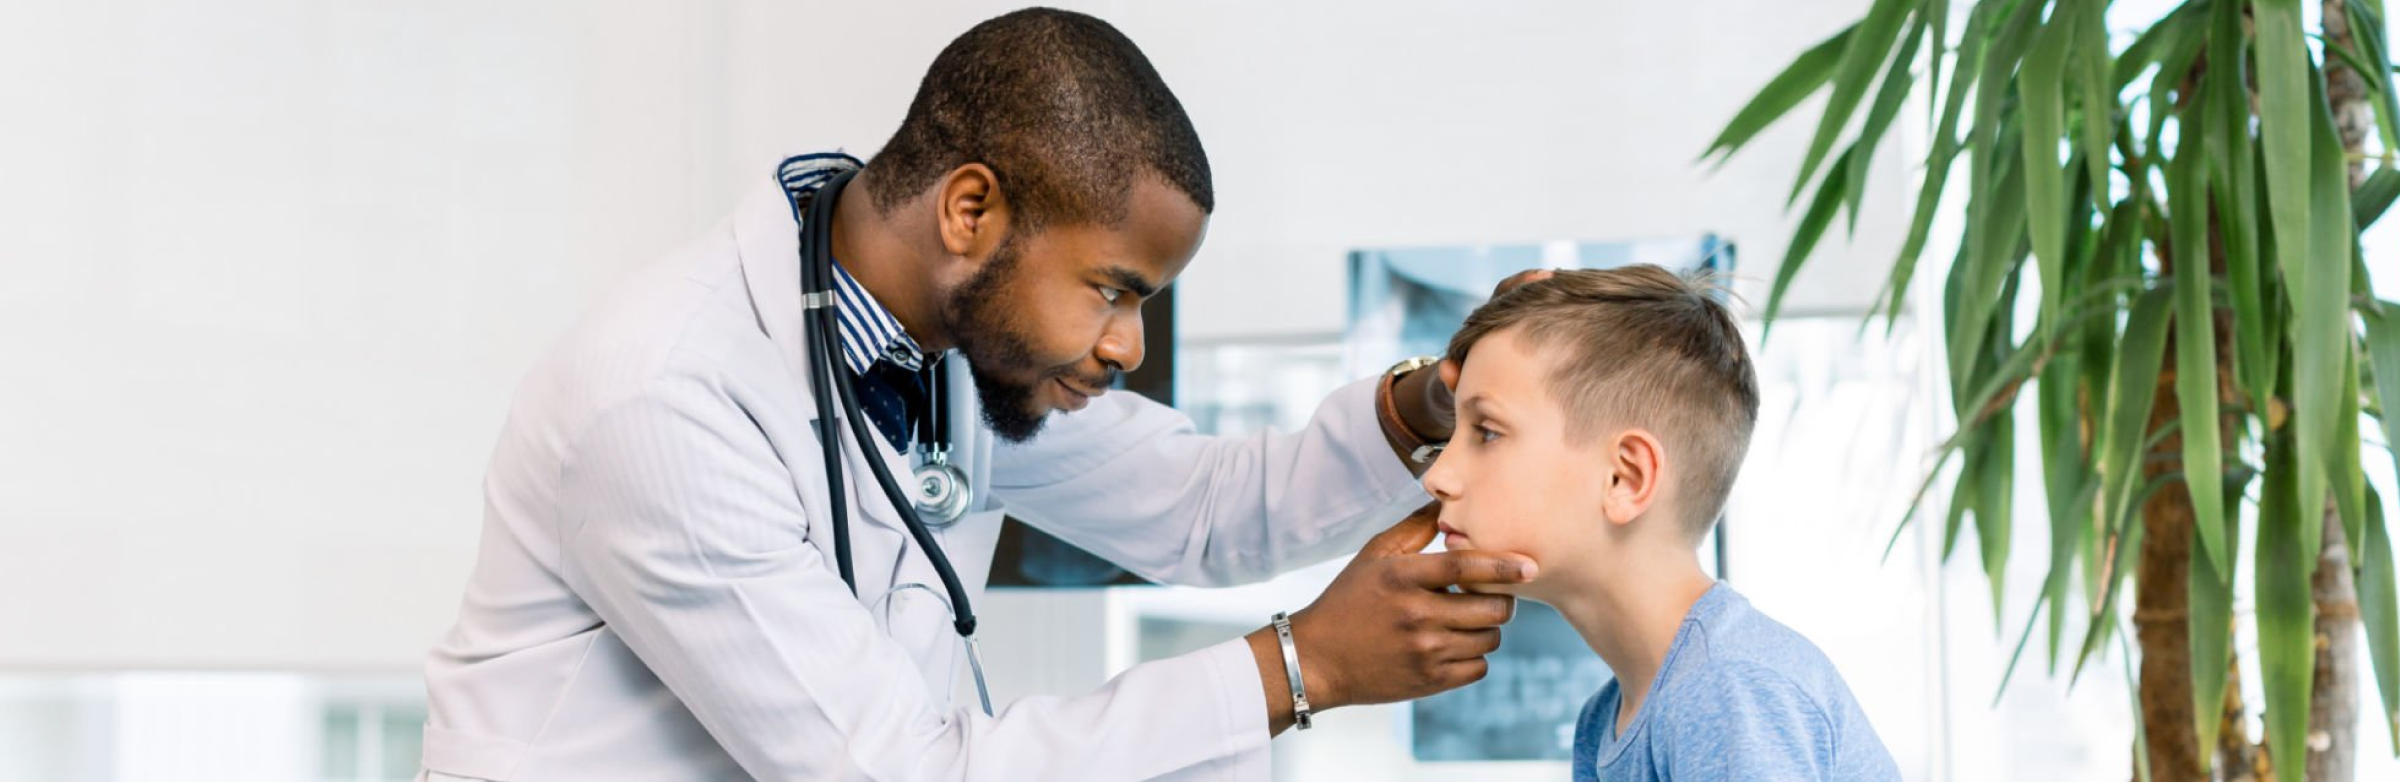 A male doctor examines a young boy’s eye in a clinic setting.